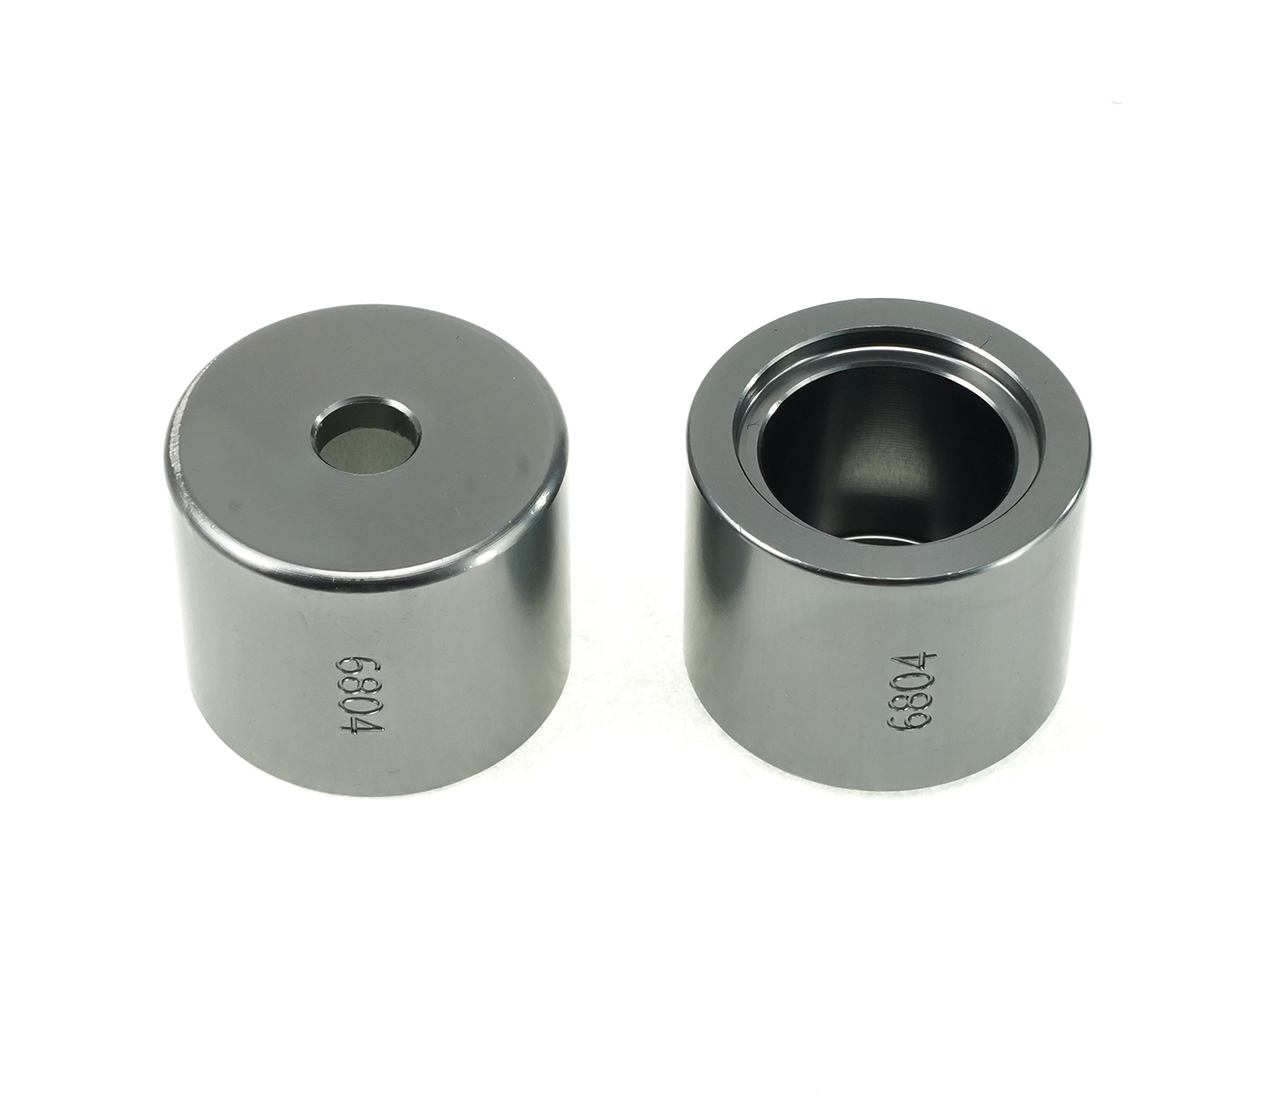 Enduro HT 6804 Outer - Outer Bearing Guide for Bearing Press (BRT-005 or BRT-050) - single guide only